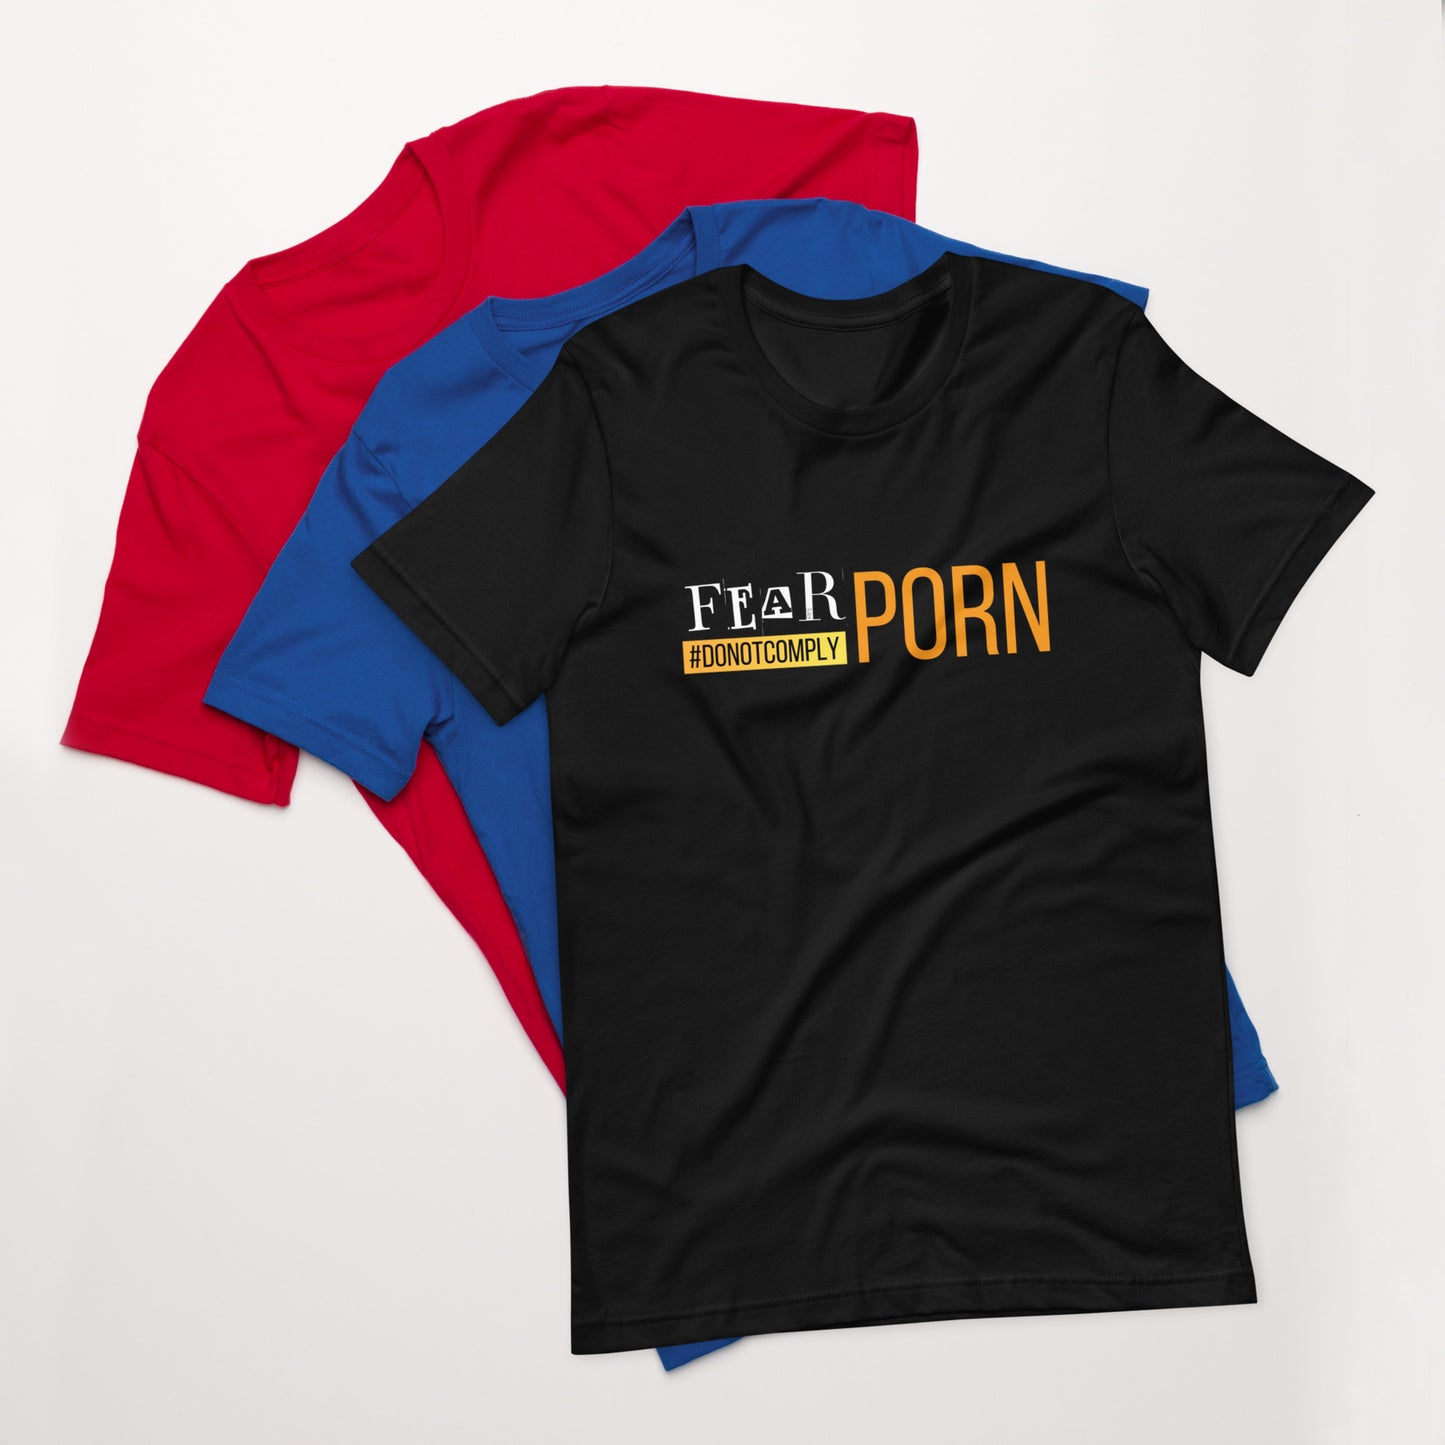 Fear Porn #DoNotComply (v2) Unisex T-Shirt